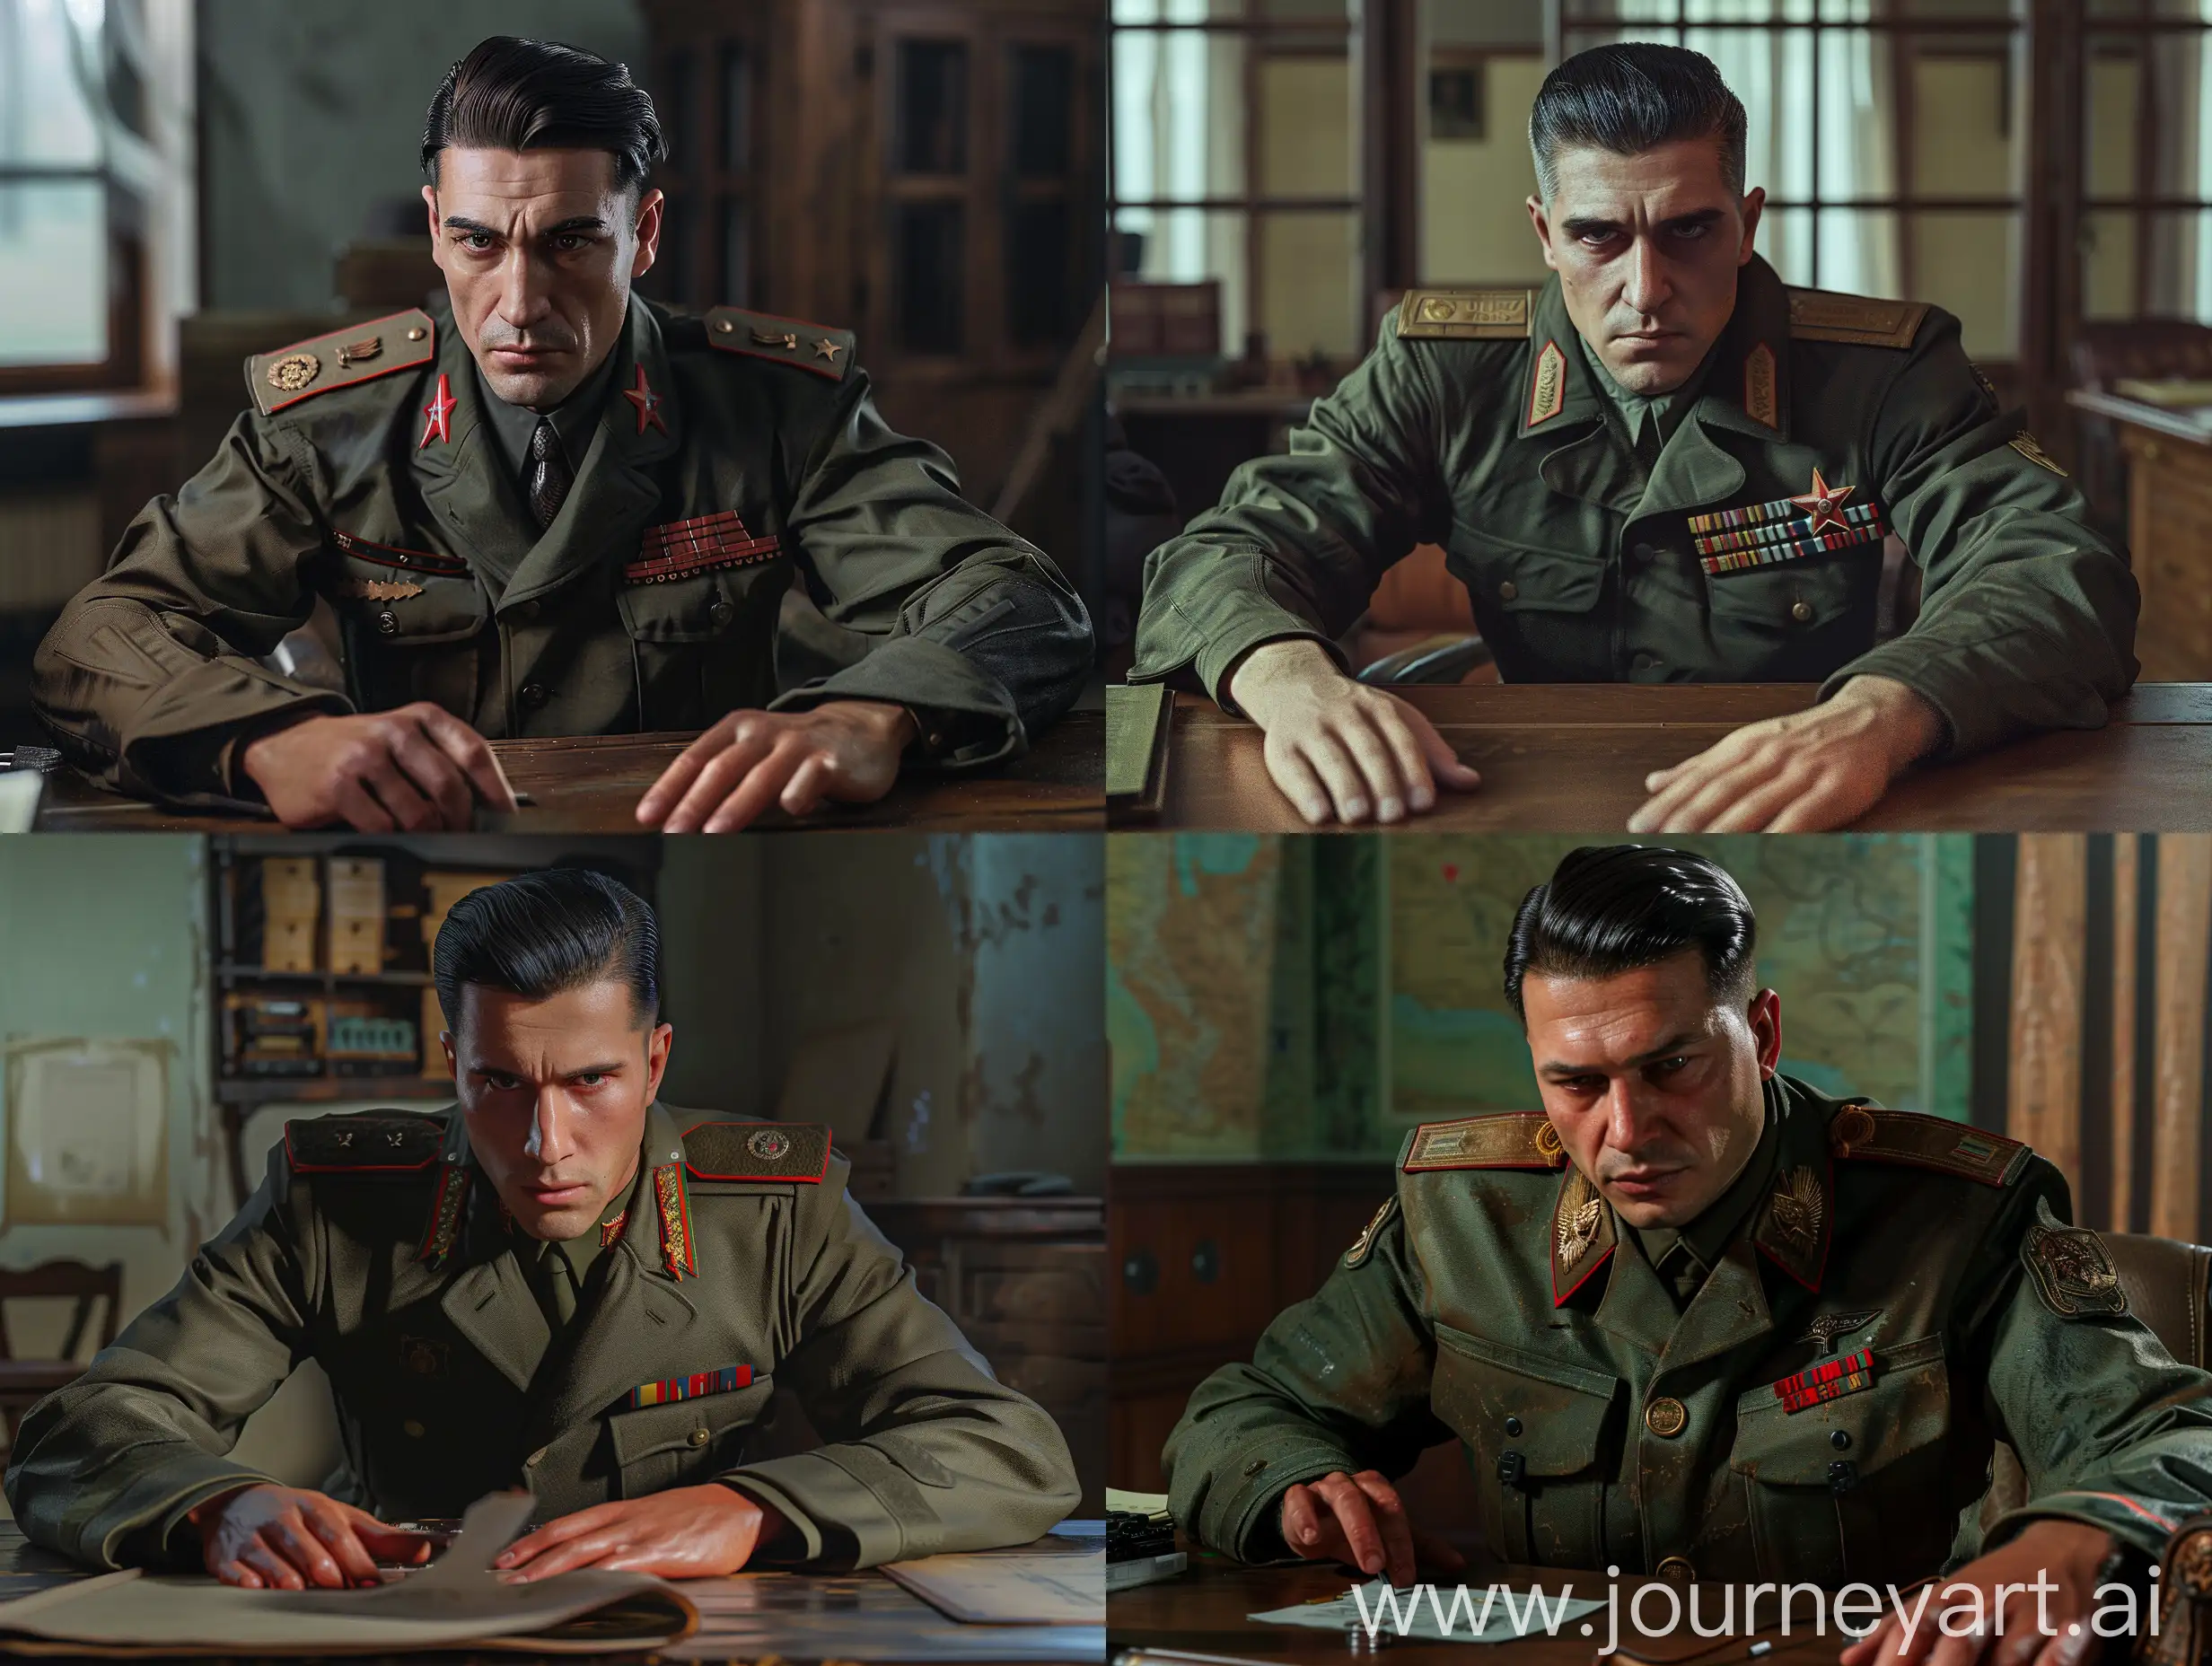 Soviet soldier, military jacket, Dark hair slicked back, sitting at desk, looking at camera, hands on table, captain's epaulettes, soviet office, hyperrealism, 8K image quality